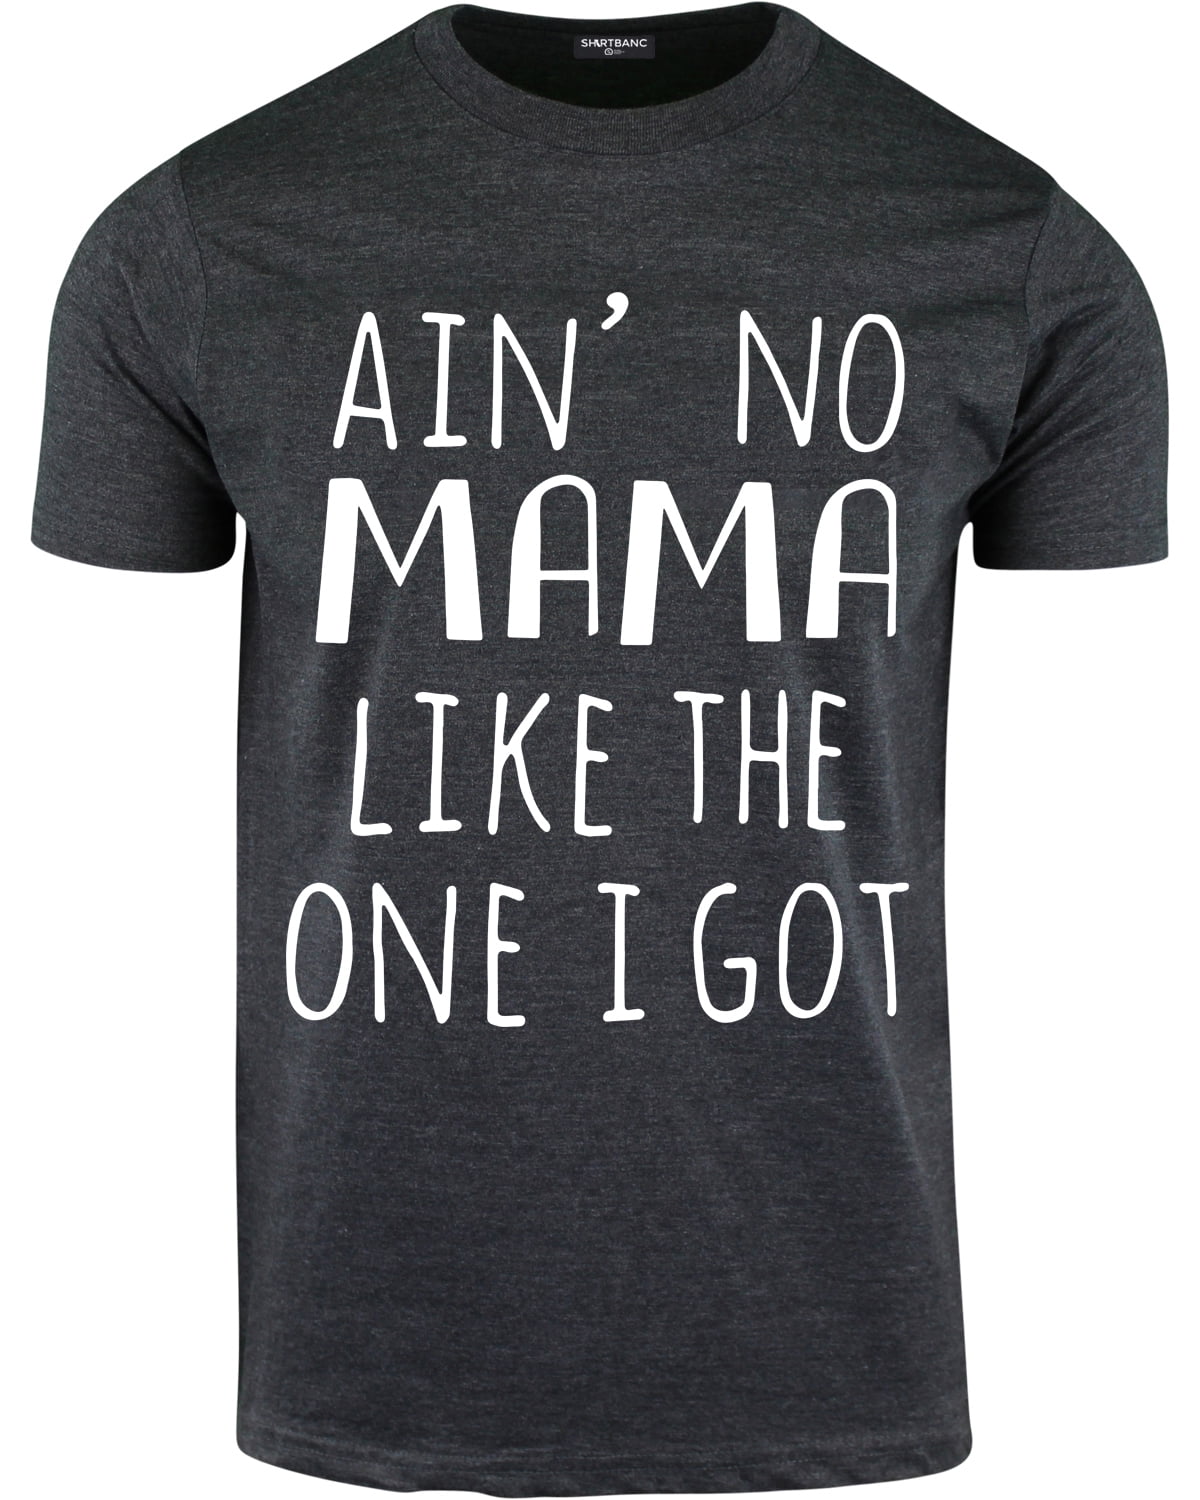 Collection 92+ Images ain’t no mama like the one i got shirt Full HD, 2k, 4k